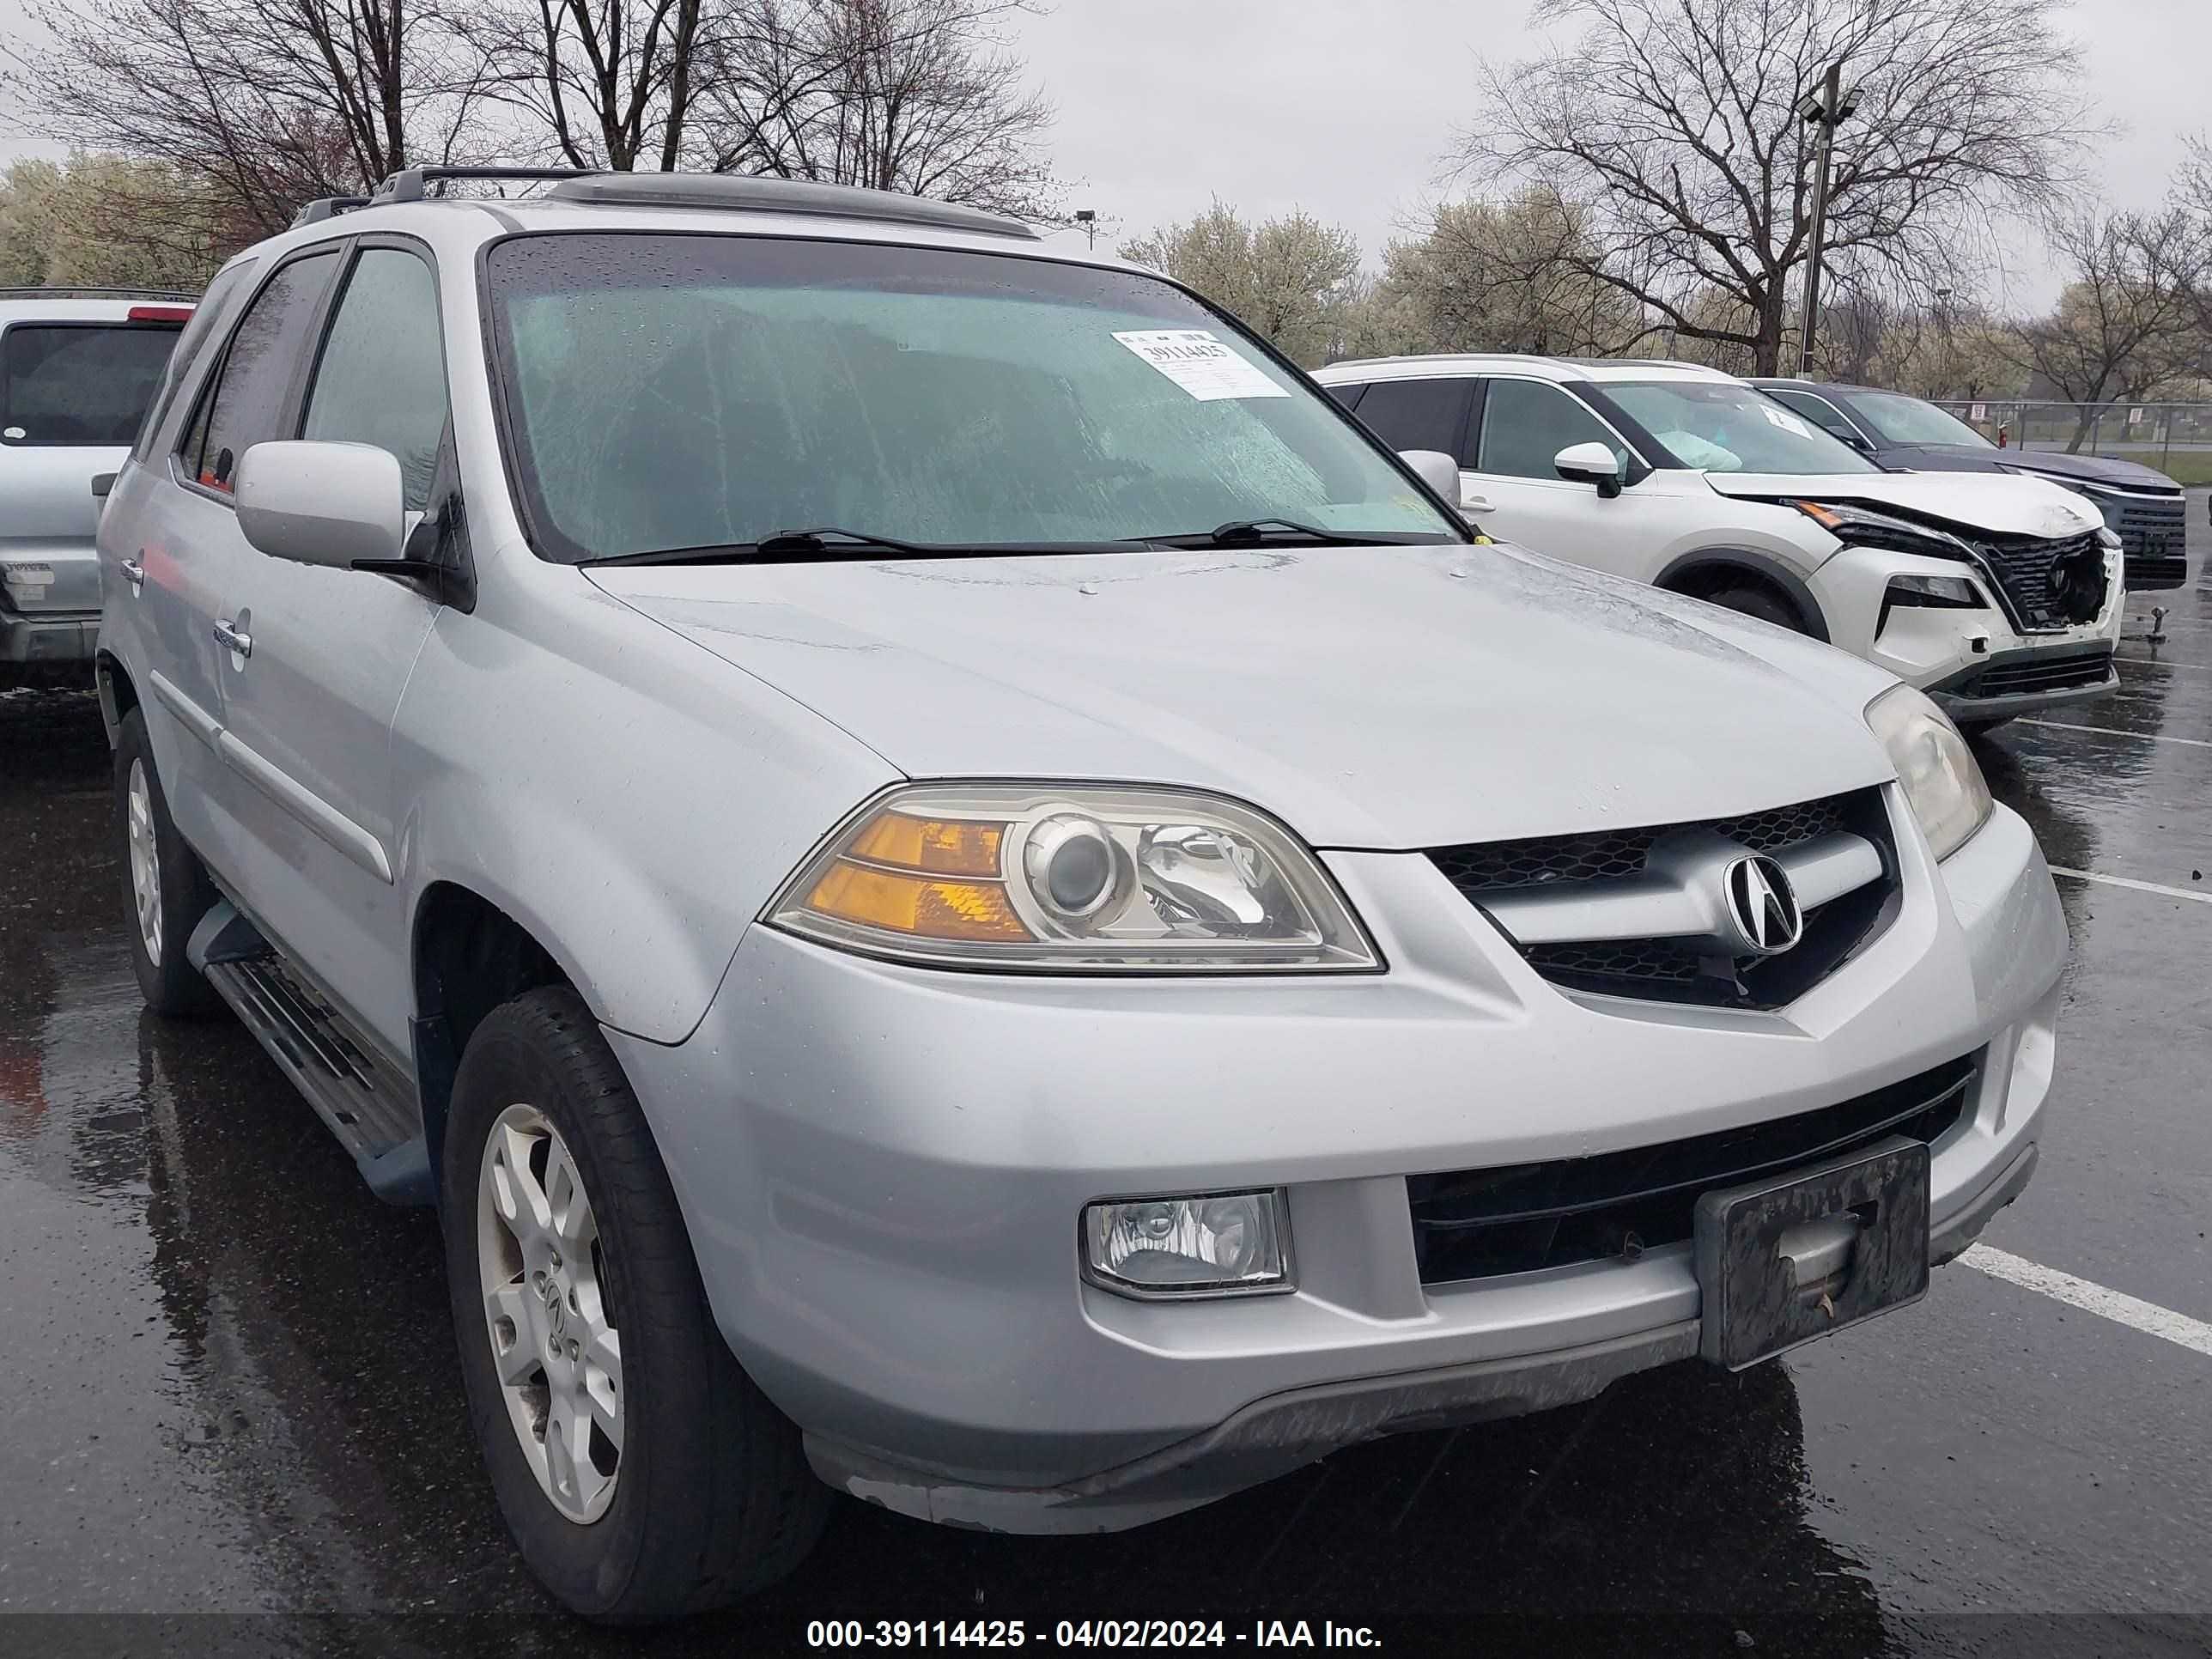 vin: 2HNYD18914H528190 2HNYD18914H528190 2004 acura mdx 3500 for Sale in 07726, 230 Pension Rd, Englishtown, New Jersey, USA